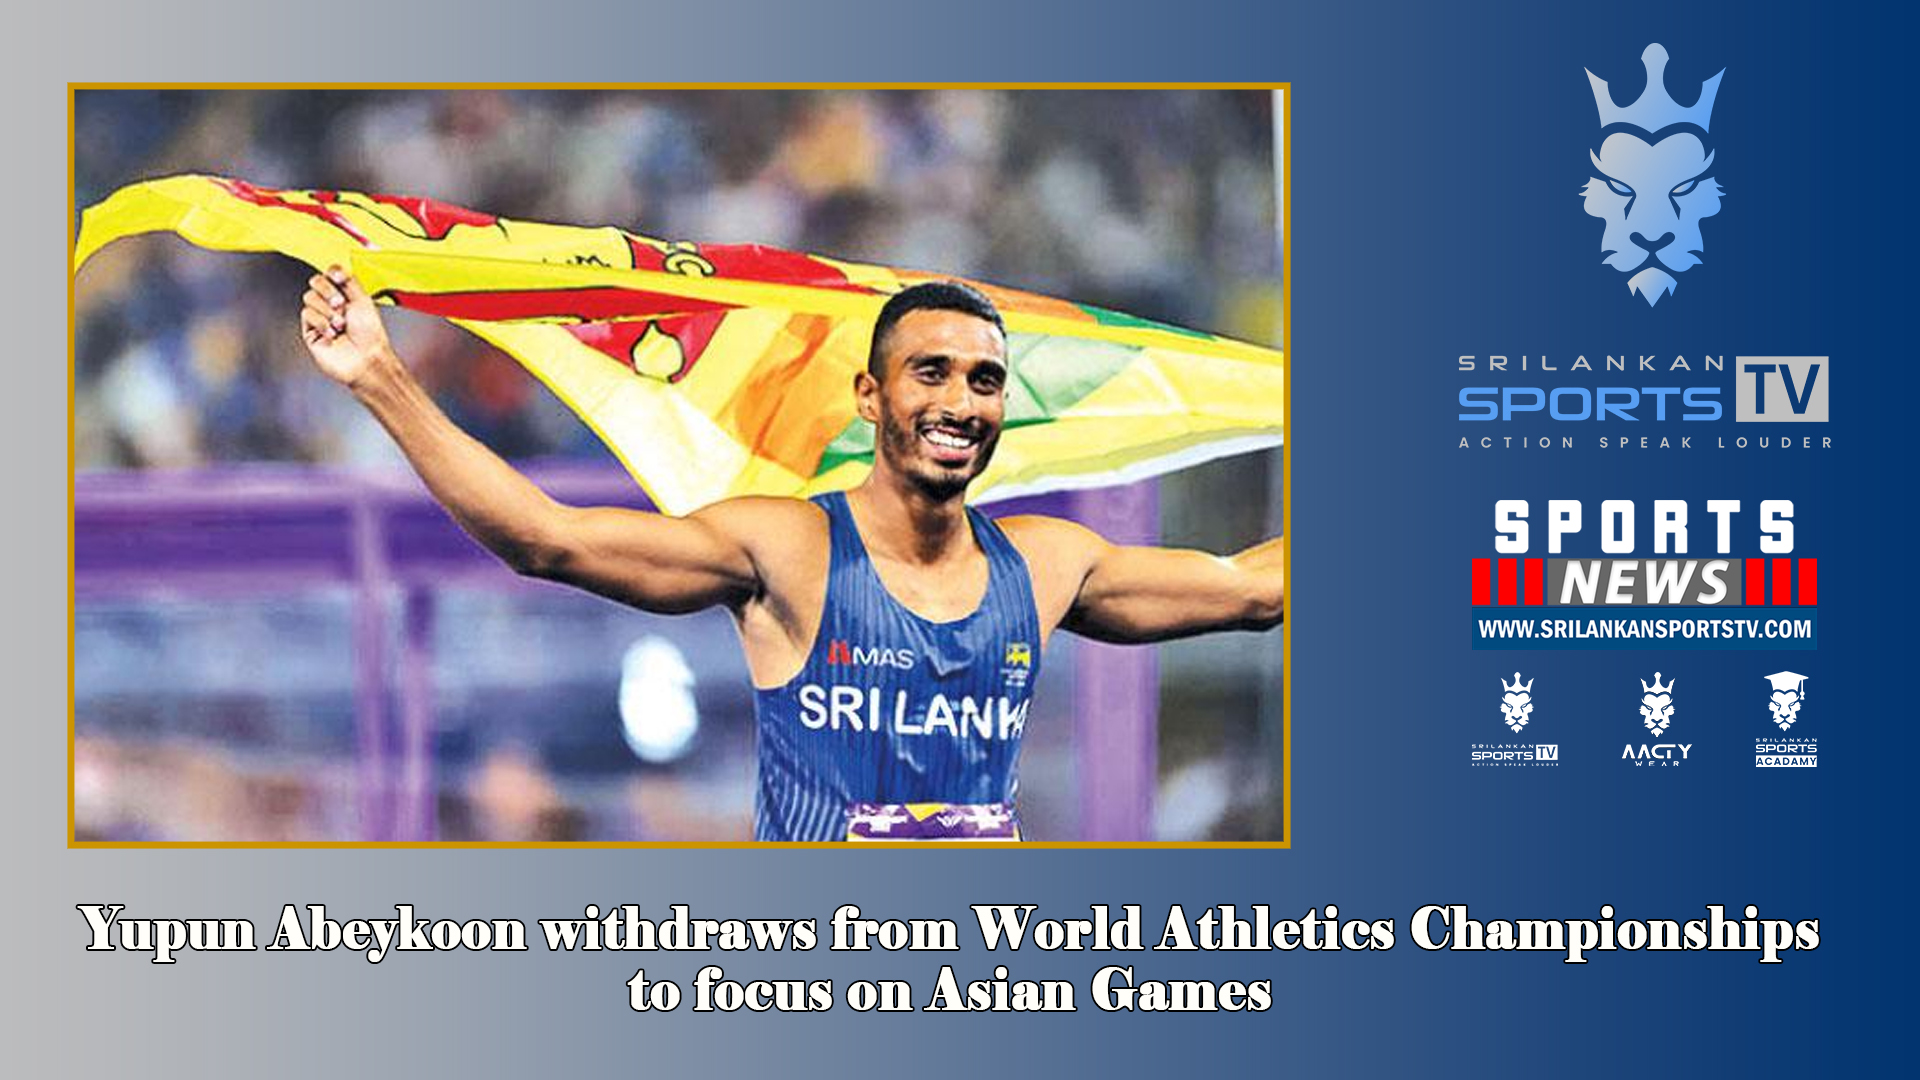 Yupun Abeykoon withdraws from World Athletics Championships to focus on Asian Games